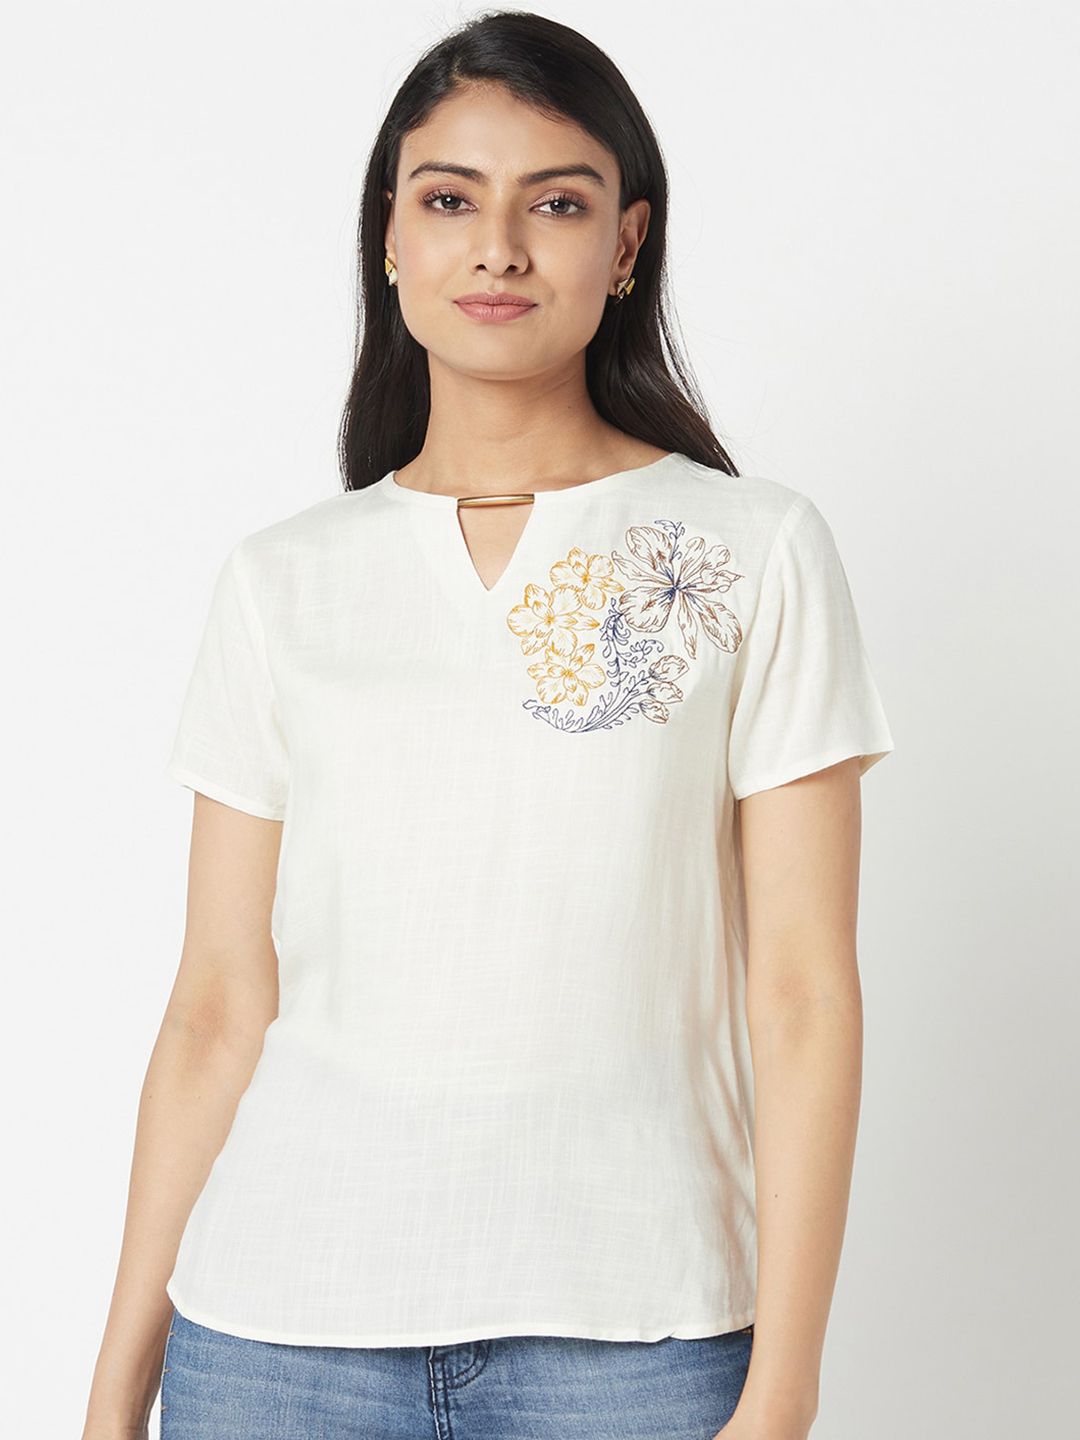 Miss Grace Notched Neck Embroidered Top Price in India